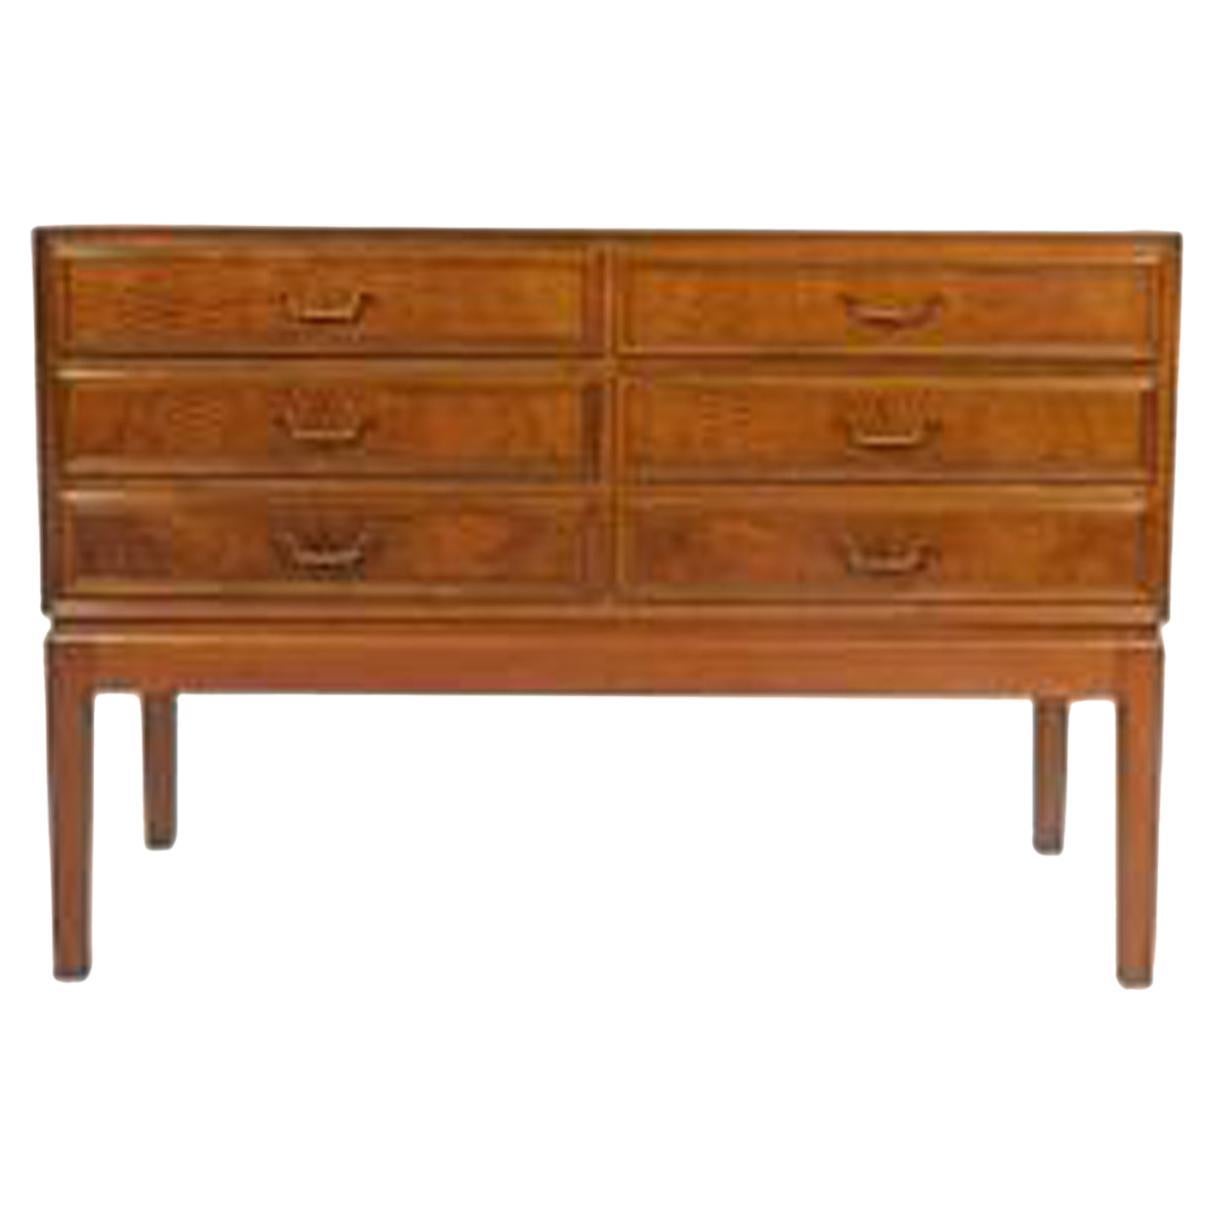 1940s Walnut Chest of Drawers Attributed to Ole Wanscher